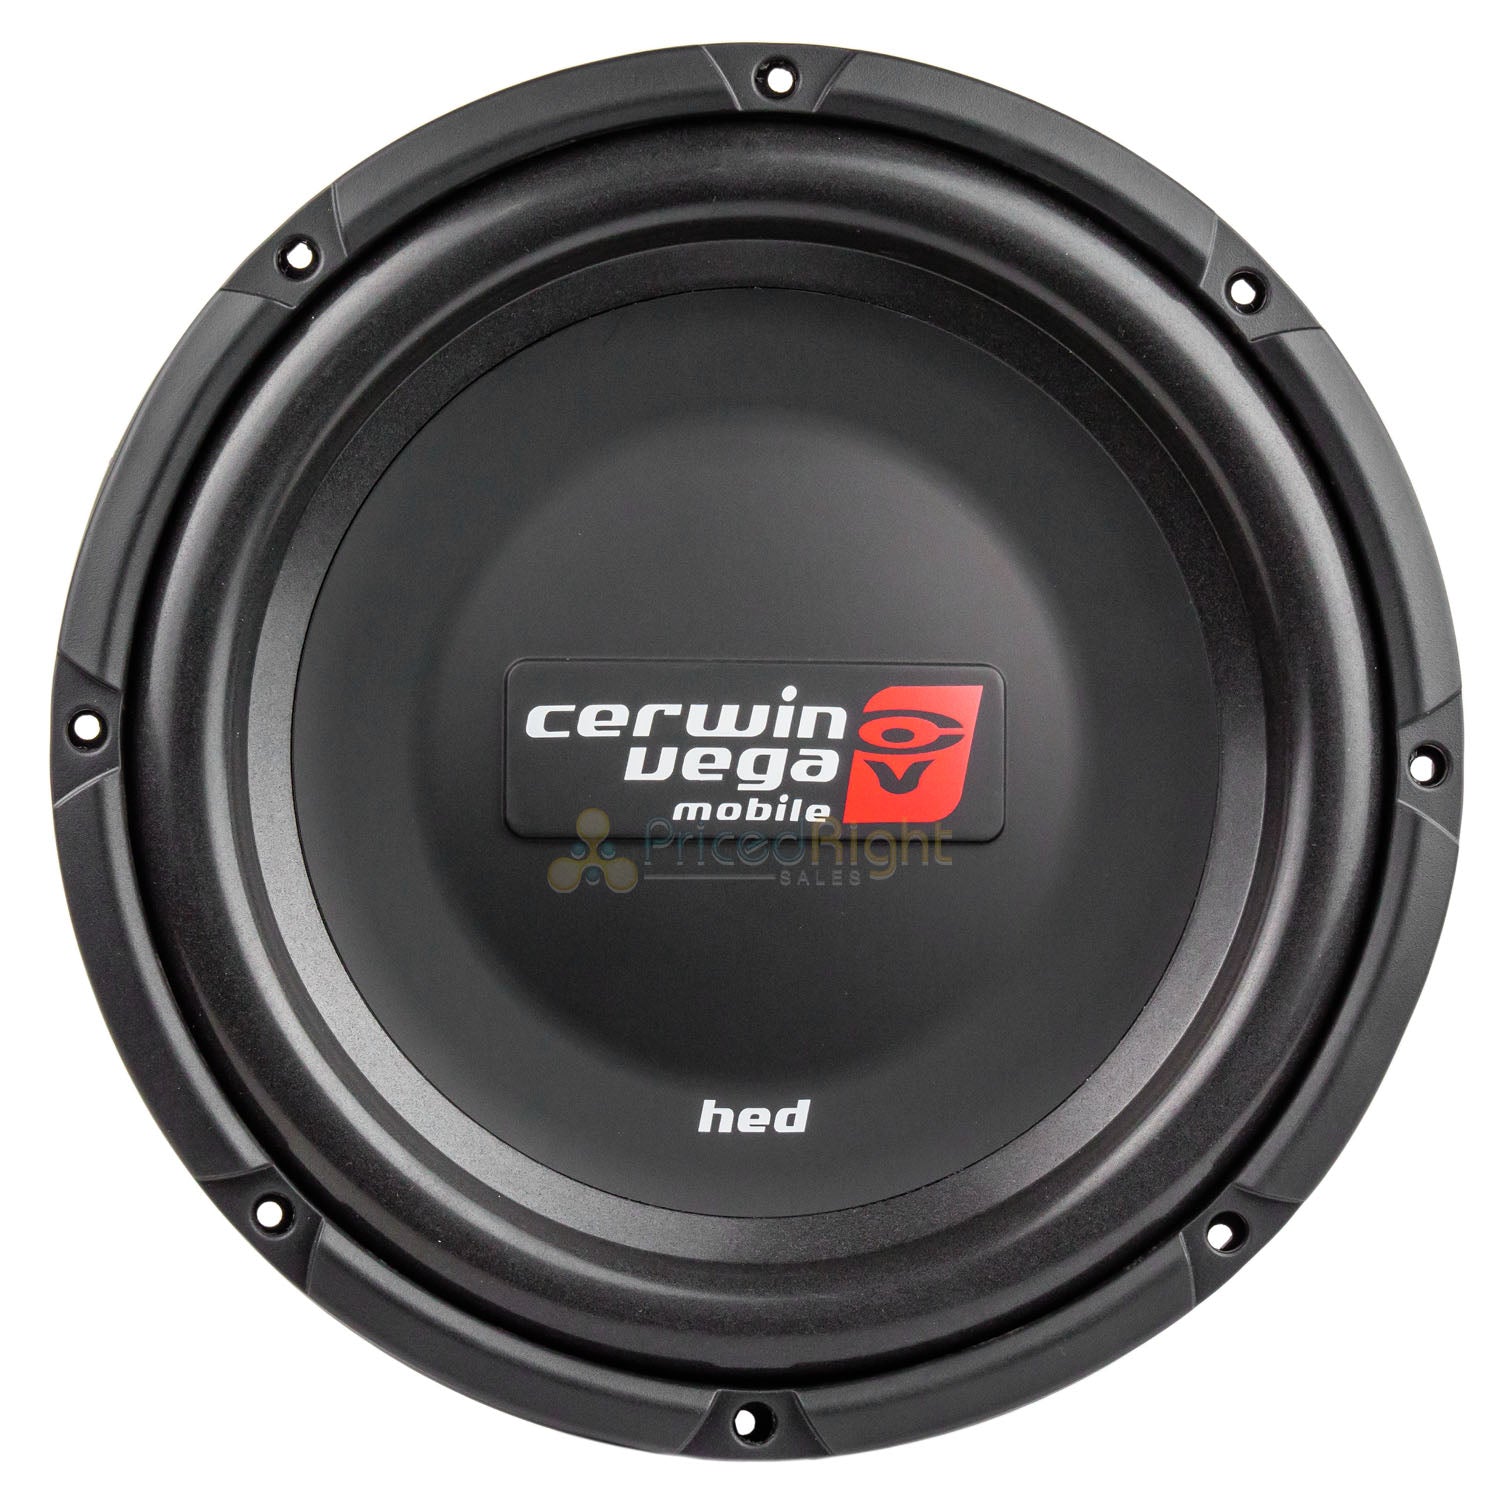 2 Dual 12" Shallow Subwoofer 4 Ohm 1200W Max Power HED Series Cerwin Vega HS124D